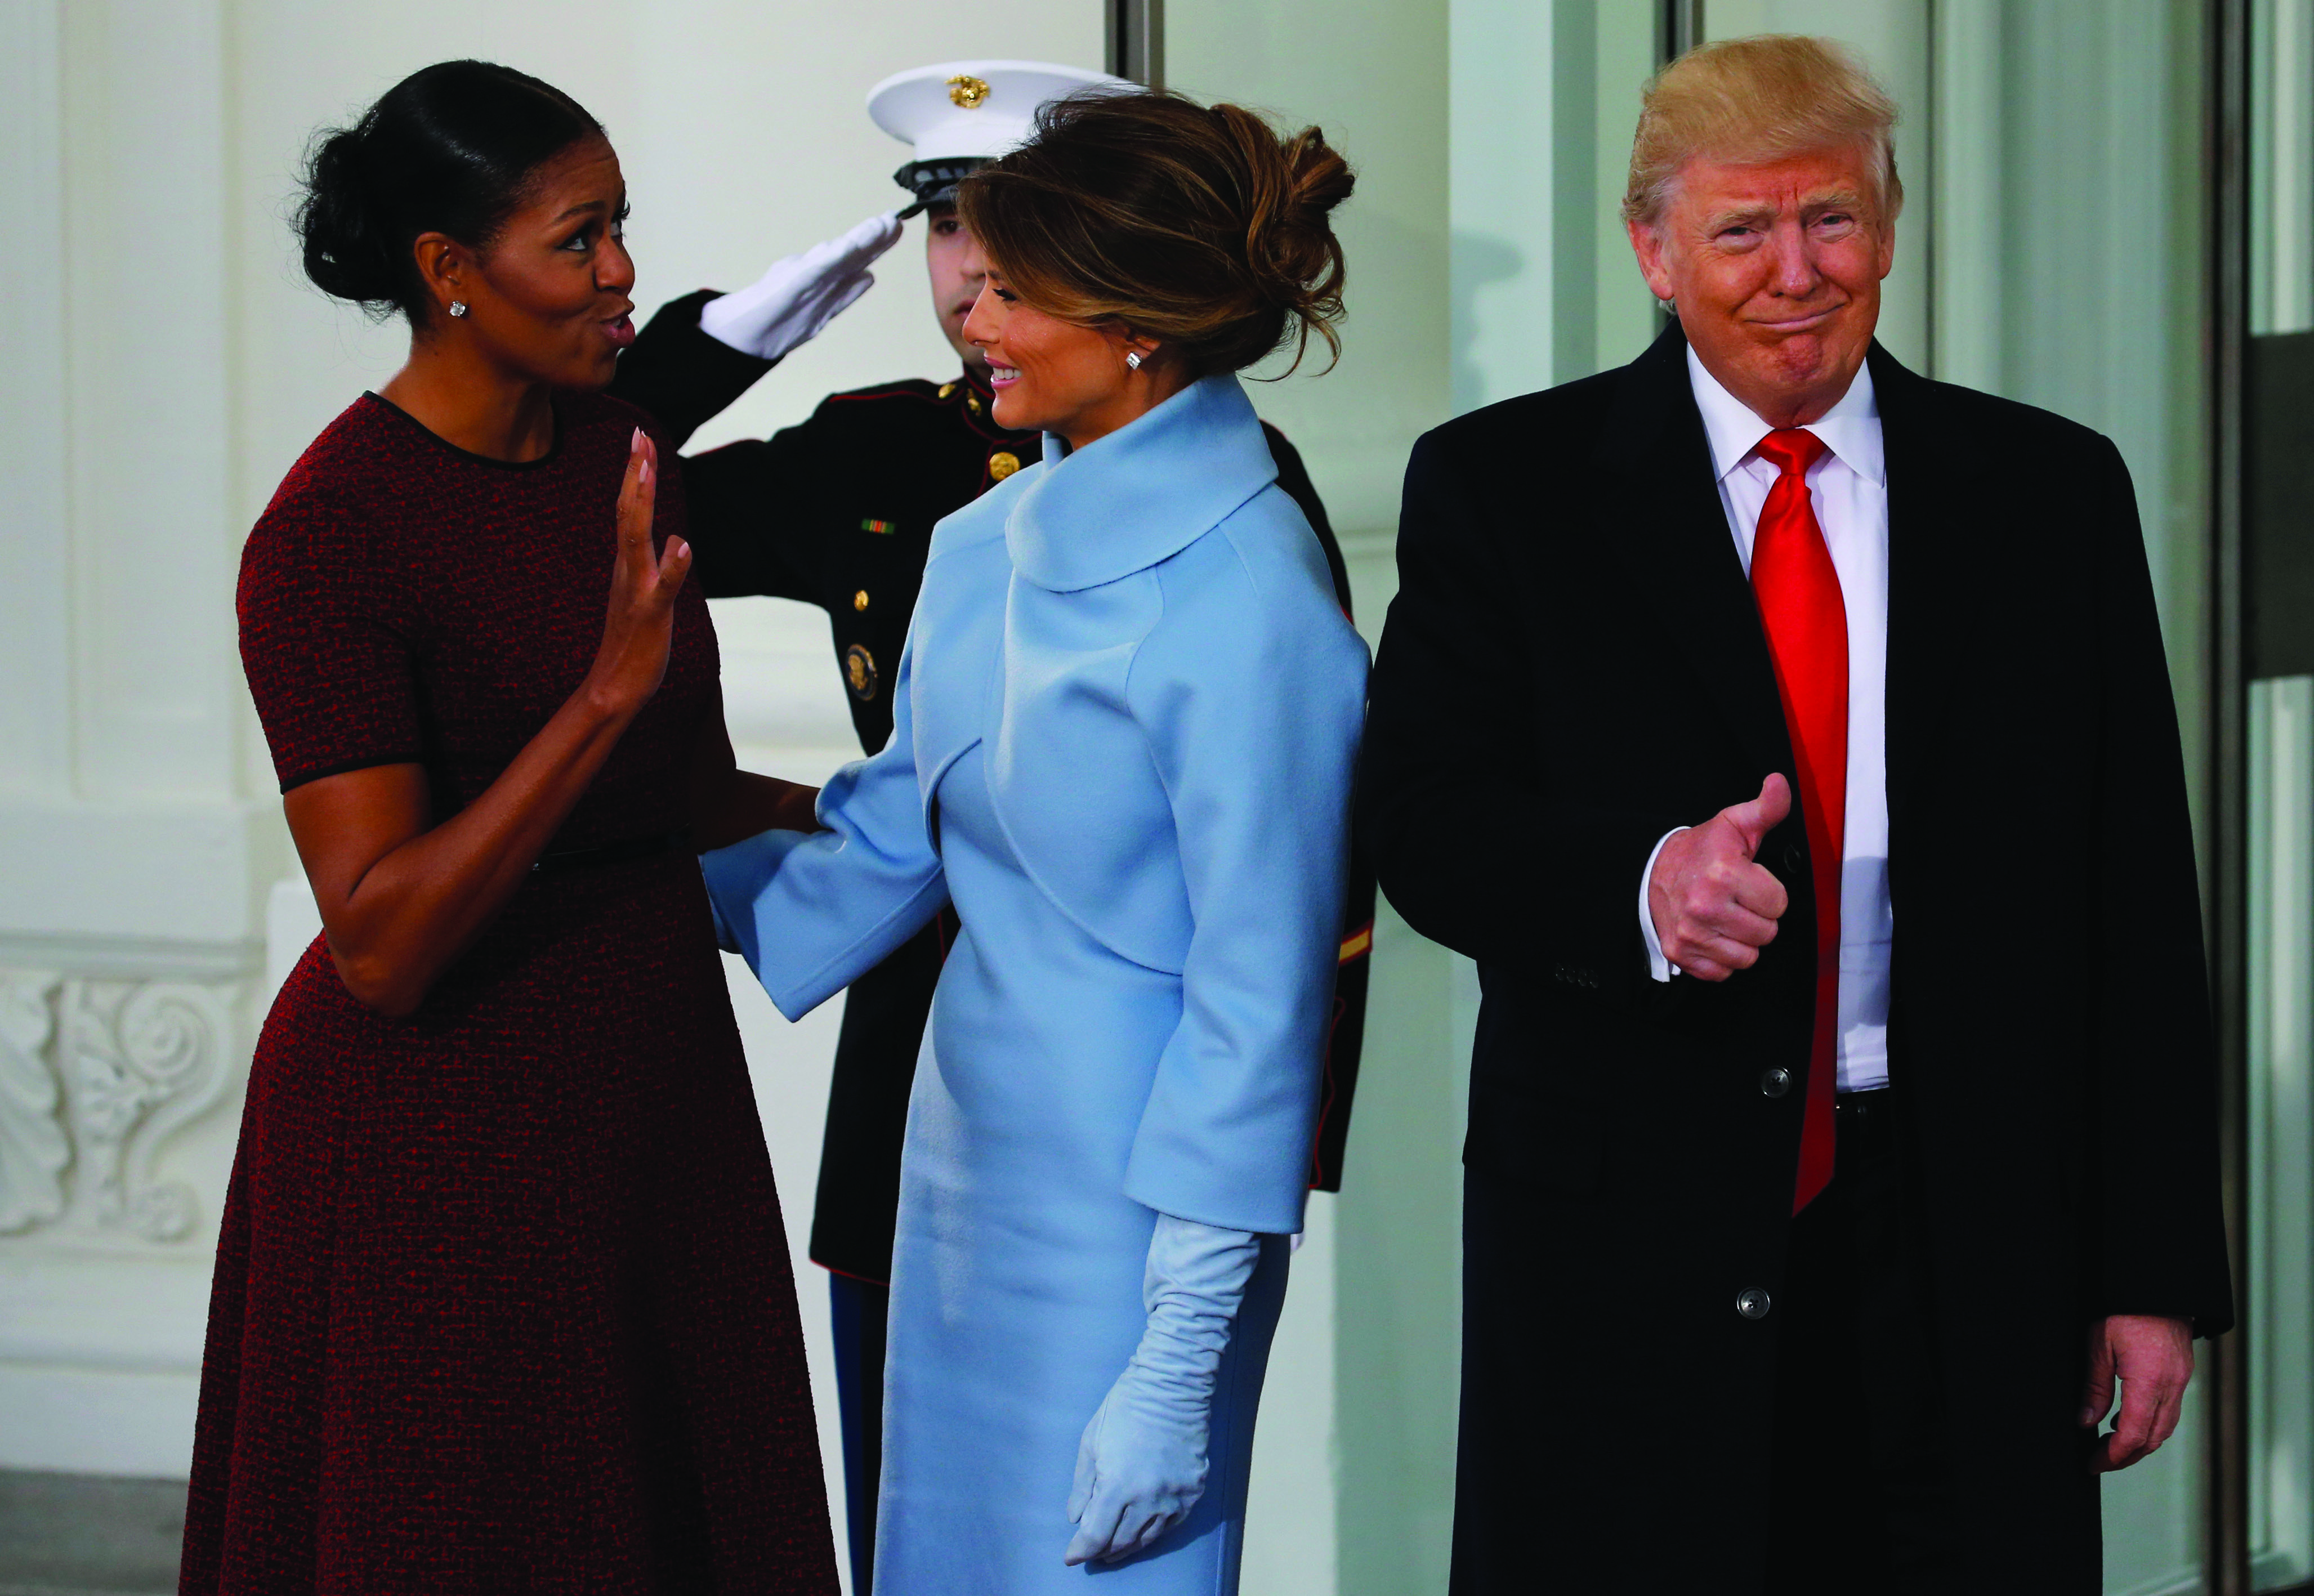 U.S. first lady Michelle Obama (L) greets U.S. President-elect Donald Trump (R) and his wife Melania for tea before the inauguration at the White House in Washington, U.S. January 20, 2017. REUTERS/Jonathan Ernst